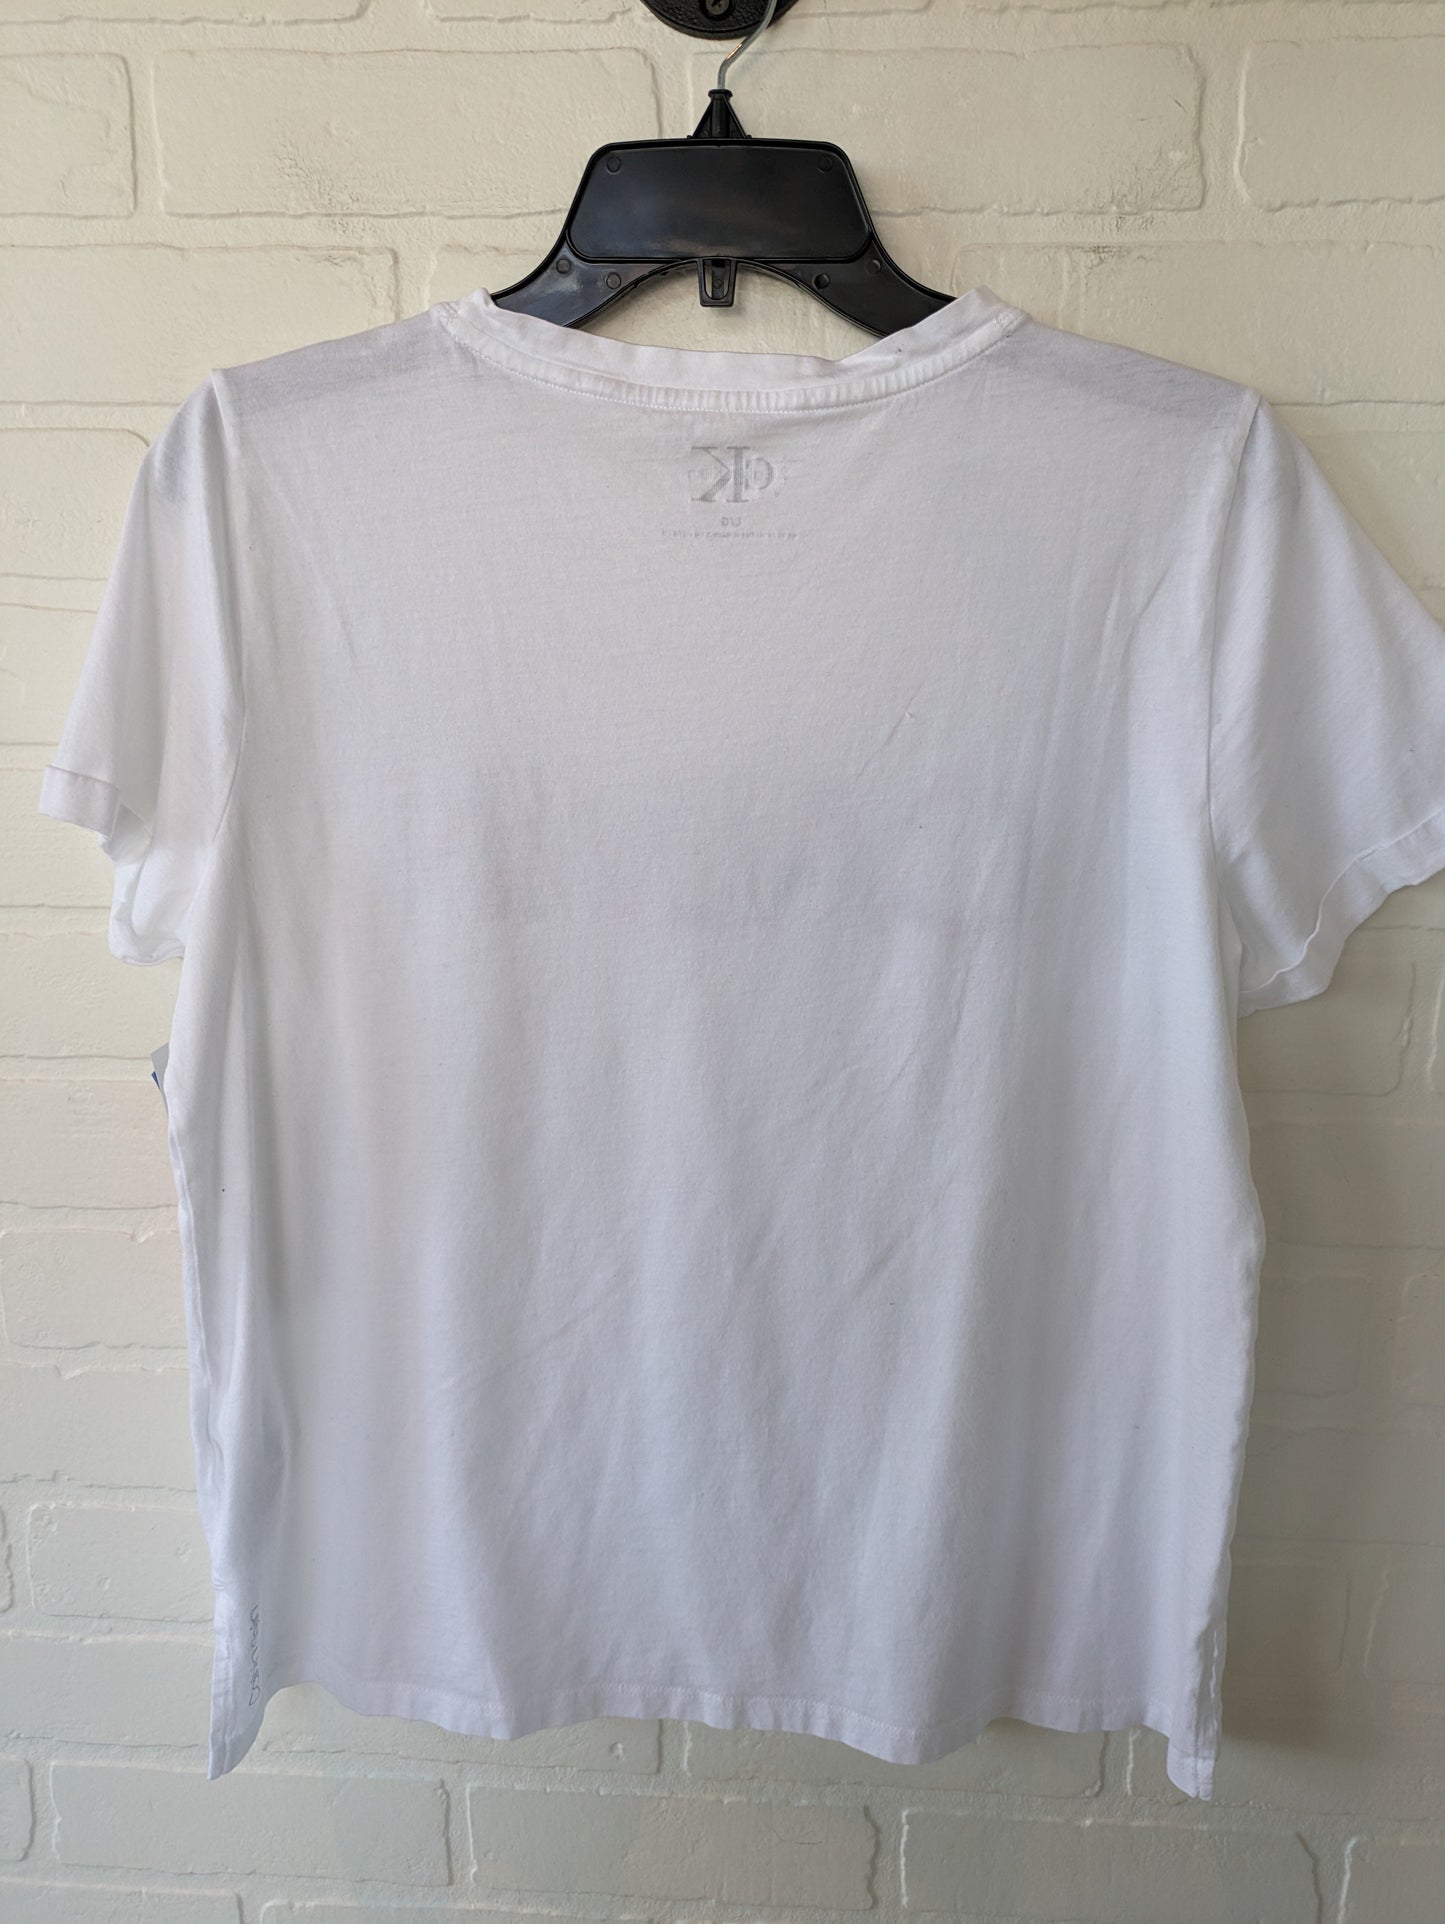 Top Short Sleeve By Calvin Klein  Size: L